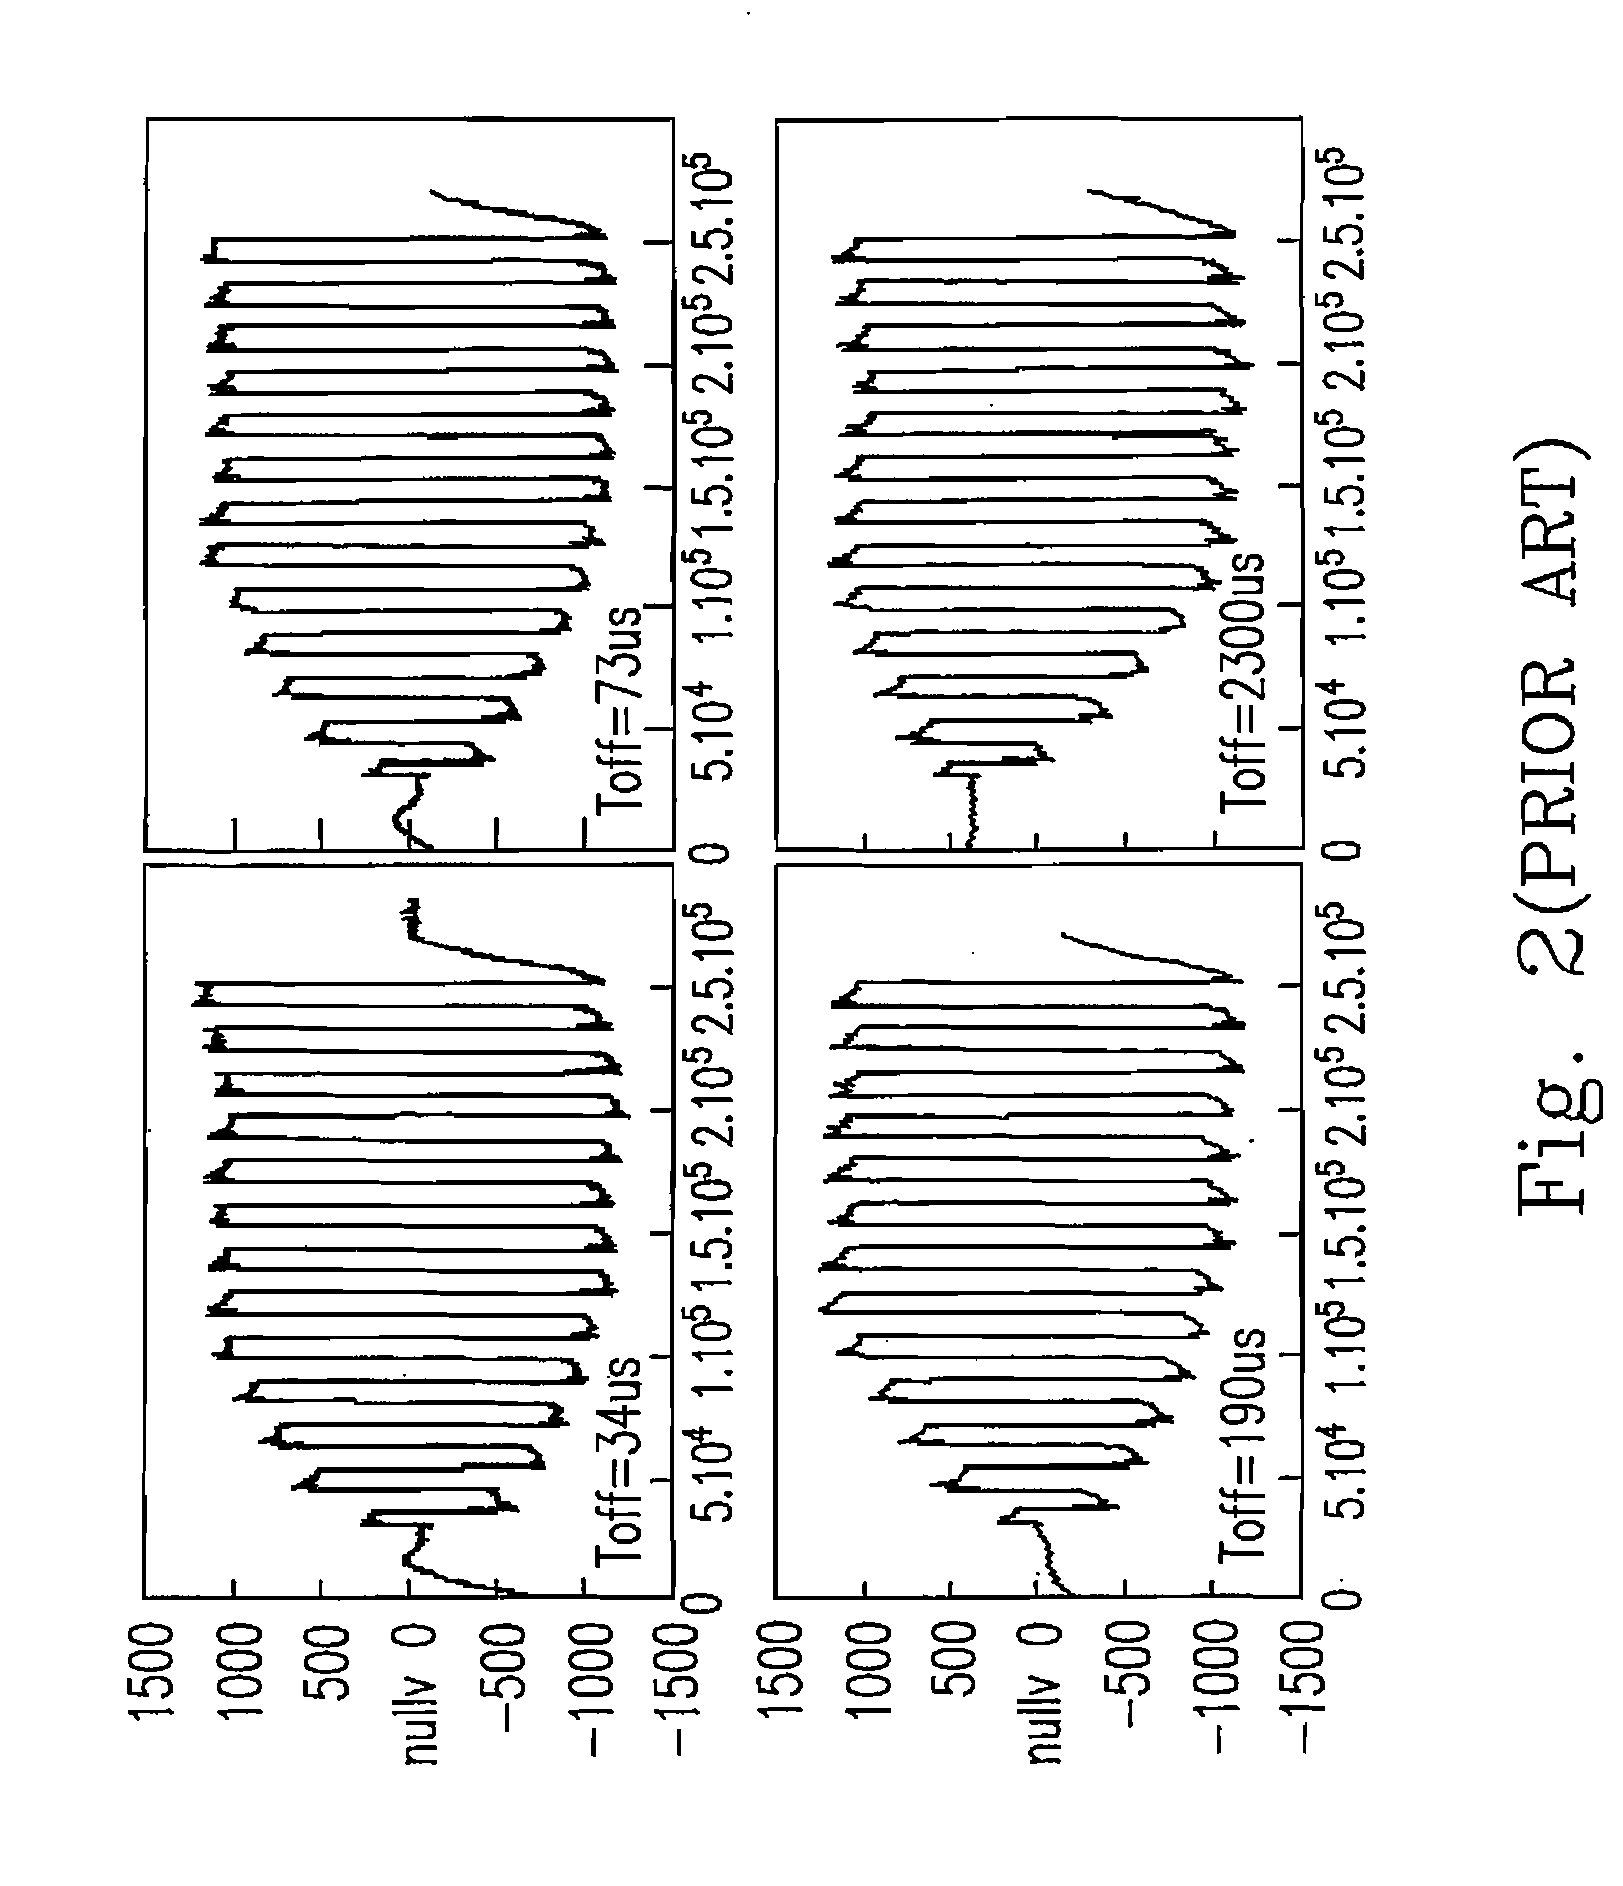 Dielectric barrier discharge lamp system and driving method thereof having relatively better performance in startup and re-startup of dimming